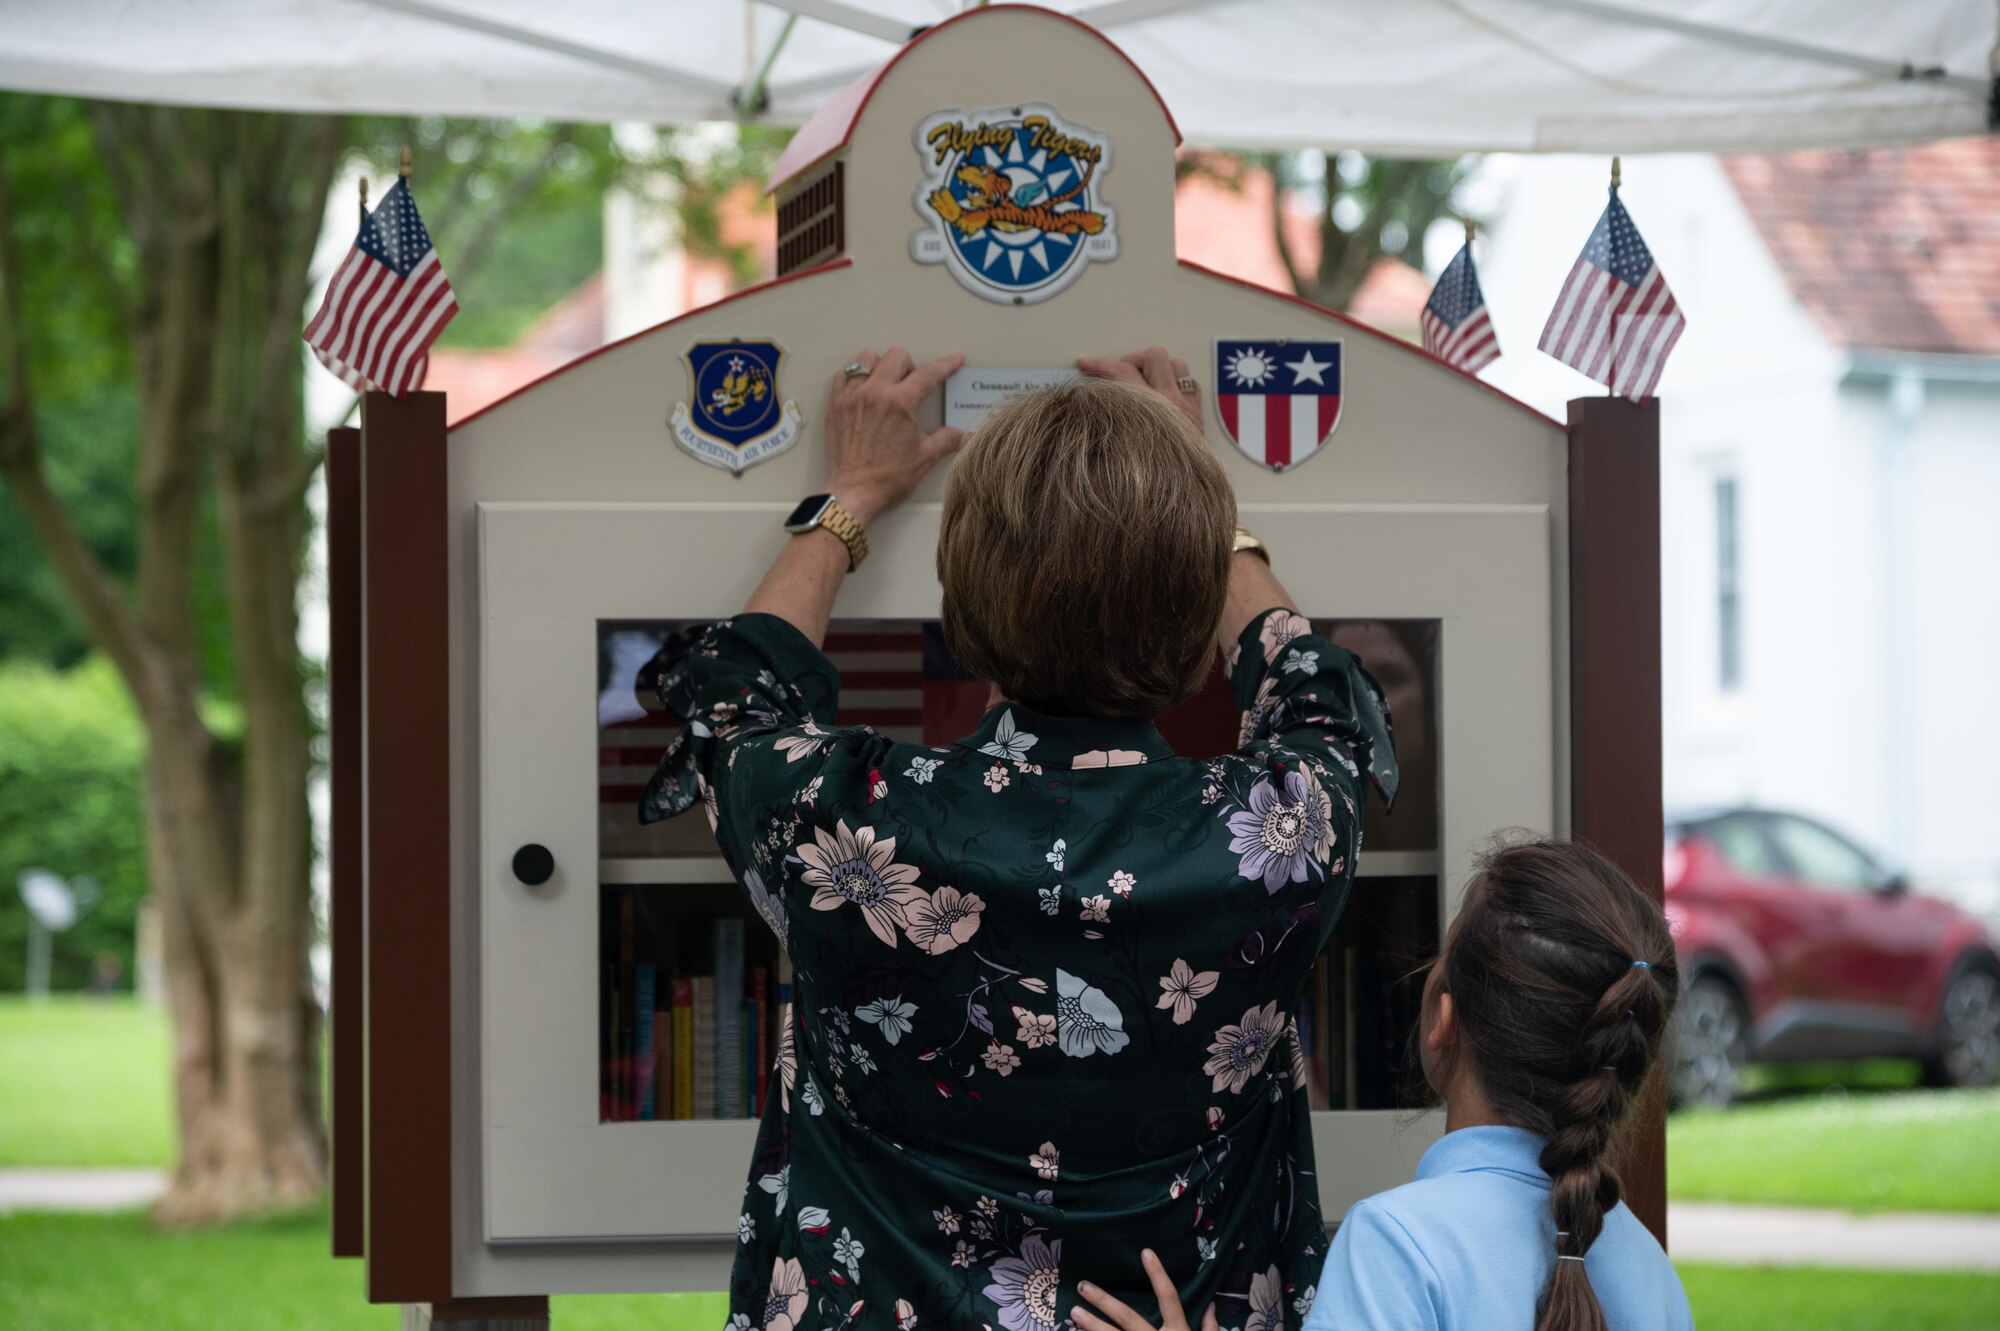 Nell Calloway, president of the Chennault Museum, adds a commemorative plaque to the new community book exchange box at Barksdale Air Force Base, June 8, 2021. Calloway is the granddaughter of Lt. Gen. Claire Chennault, to whom the book exchange box is dedicated.